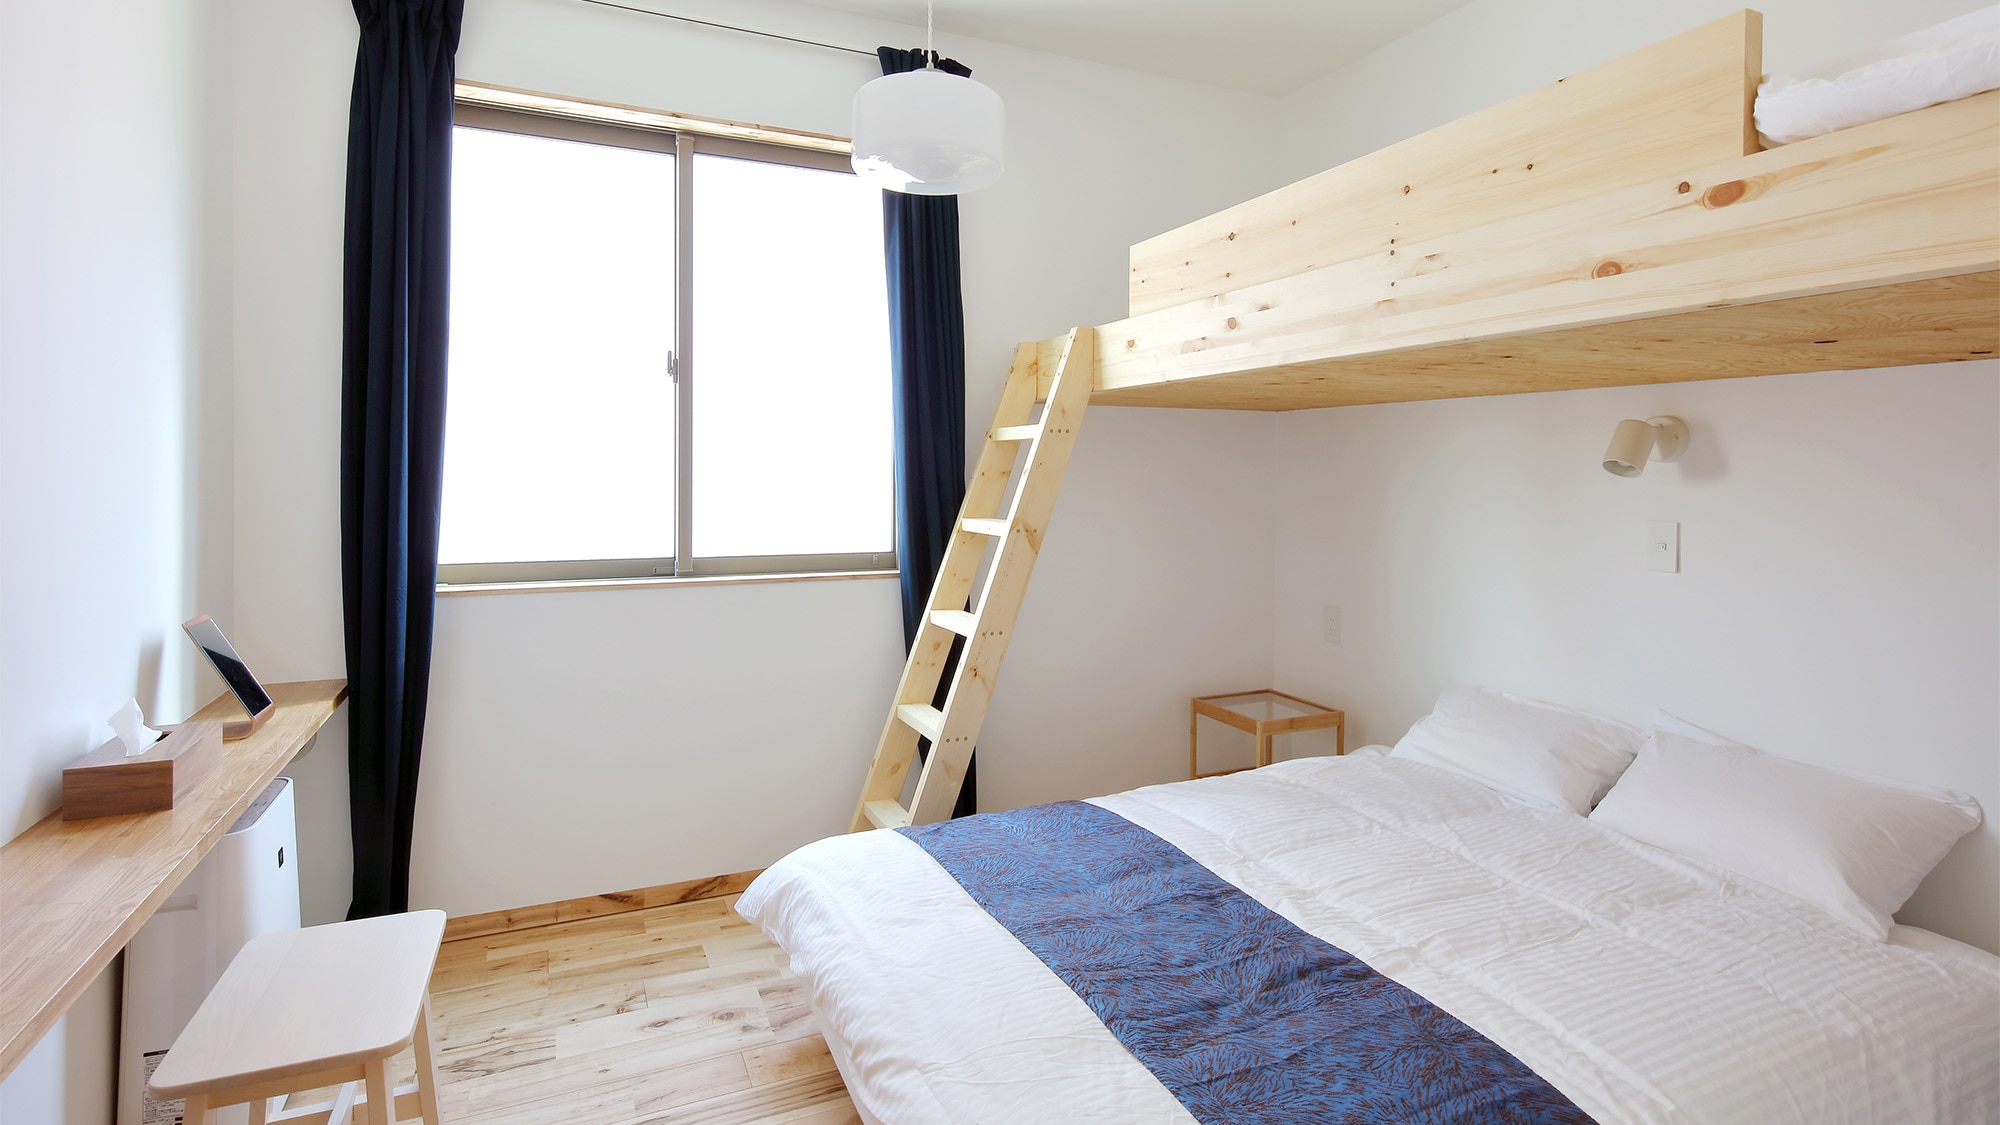 ・ [Double room with loft] Recommended for those who want to emphasize a sense of privacy